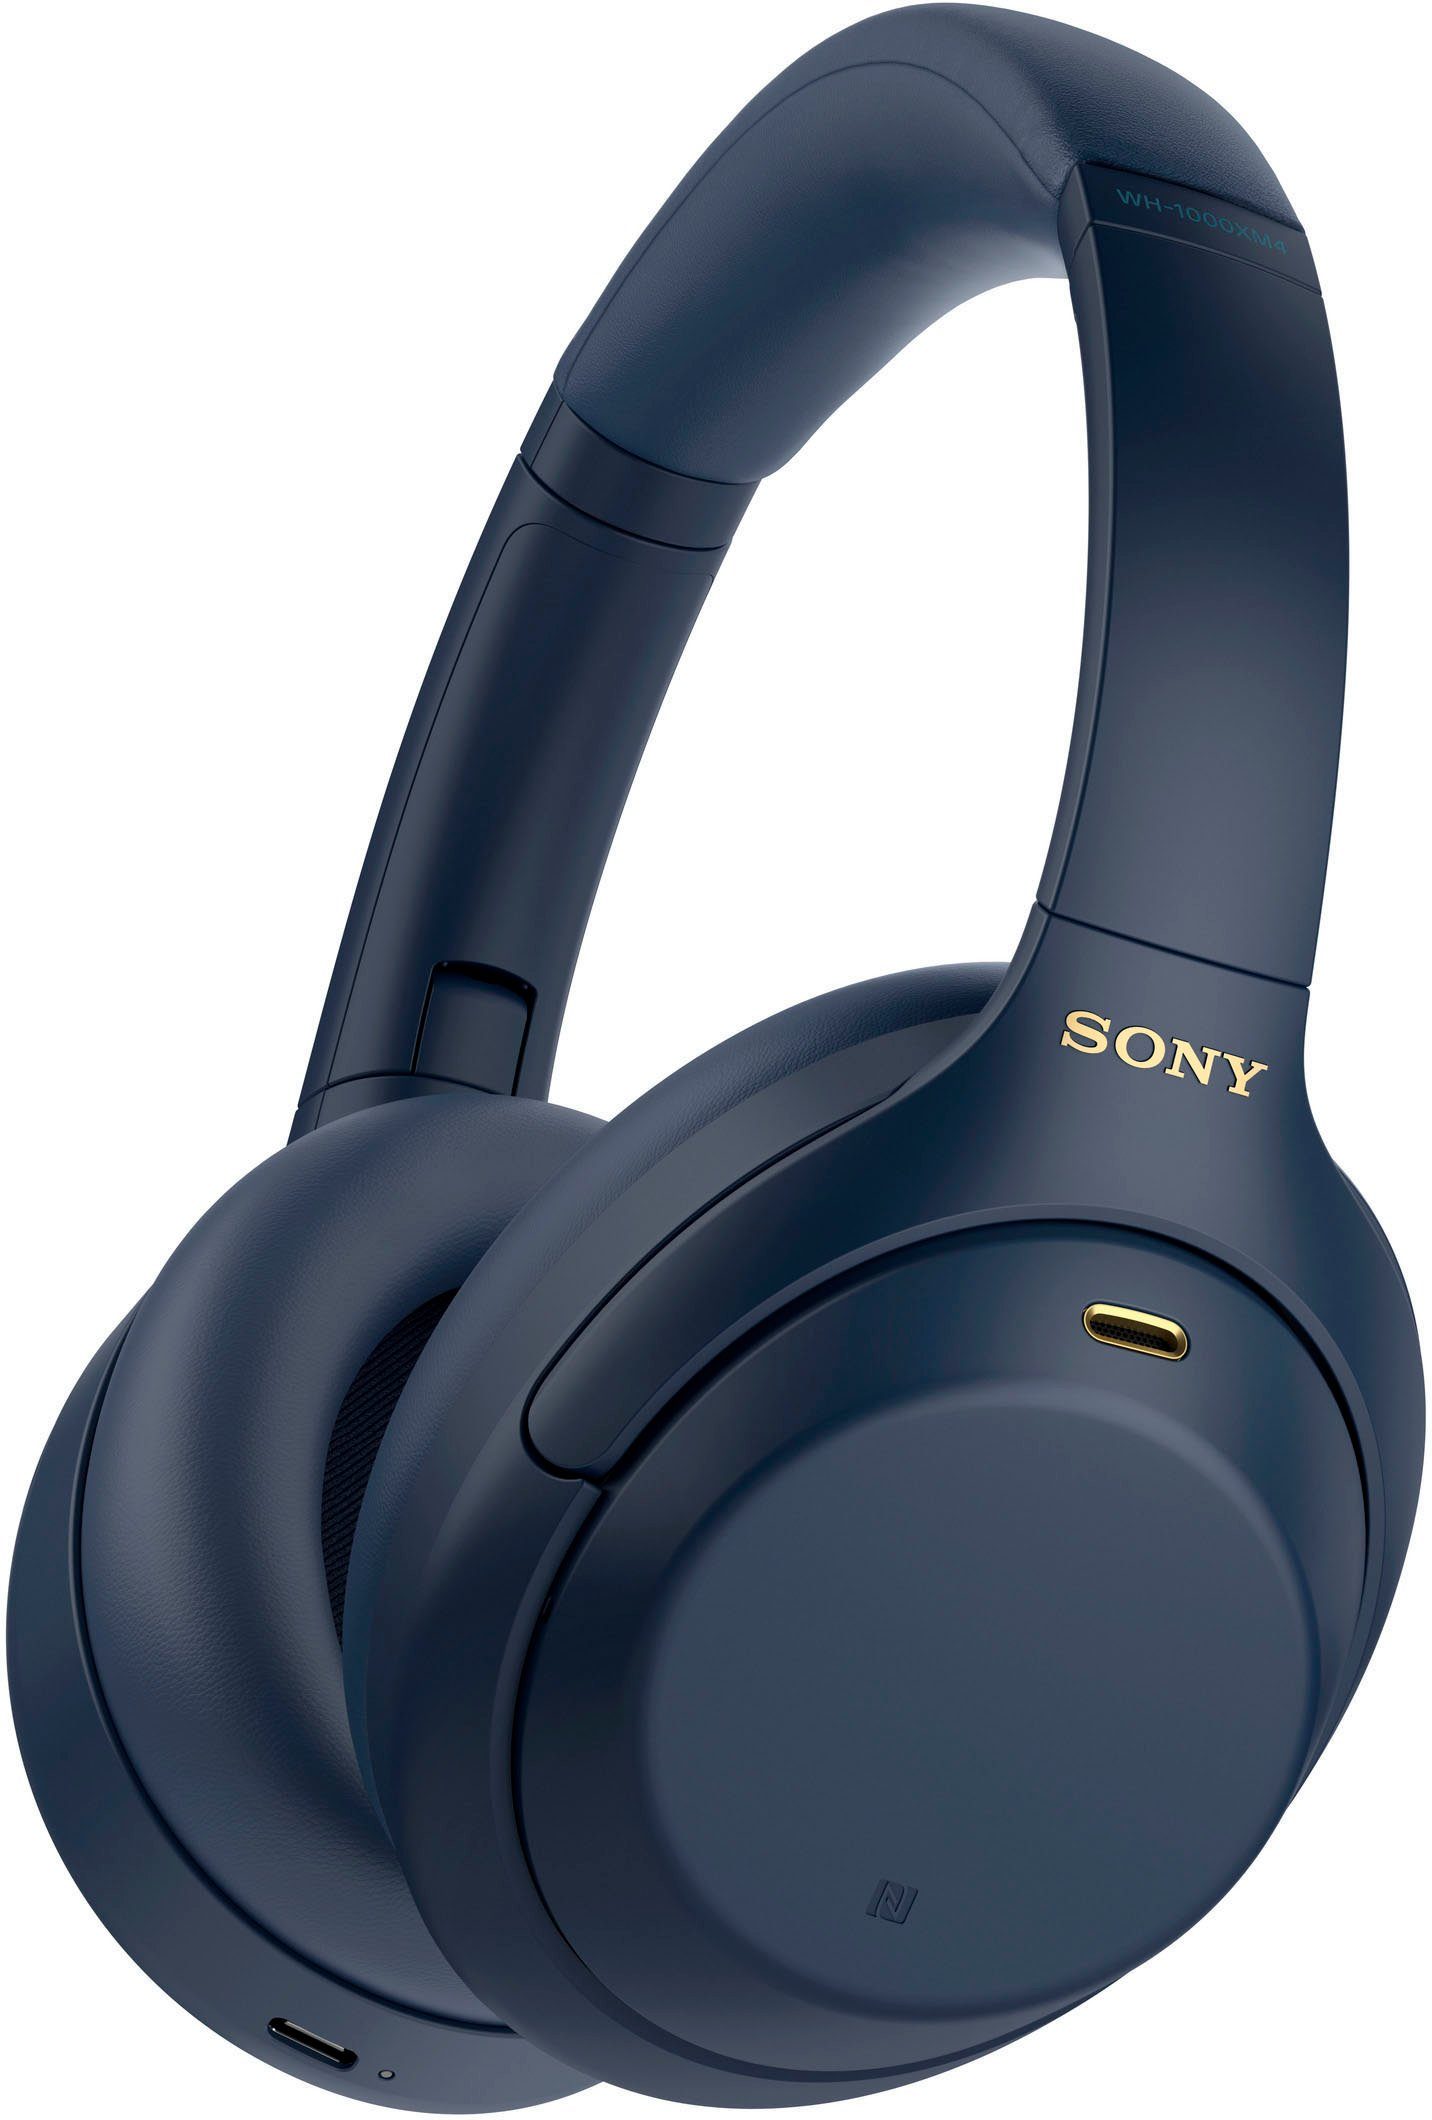 (Noise-Cancelling, via Verbindung Sensor, blau Sony Bluetooth, kabelloser Touch WH-1000XM4 Over-Ear-Kopfhörer NFC, NFC, One-Touch Schnellladefunktion)